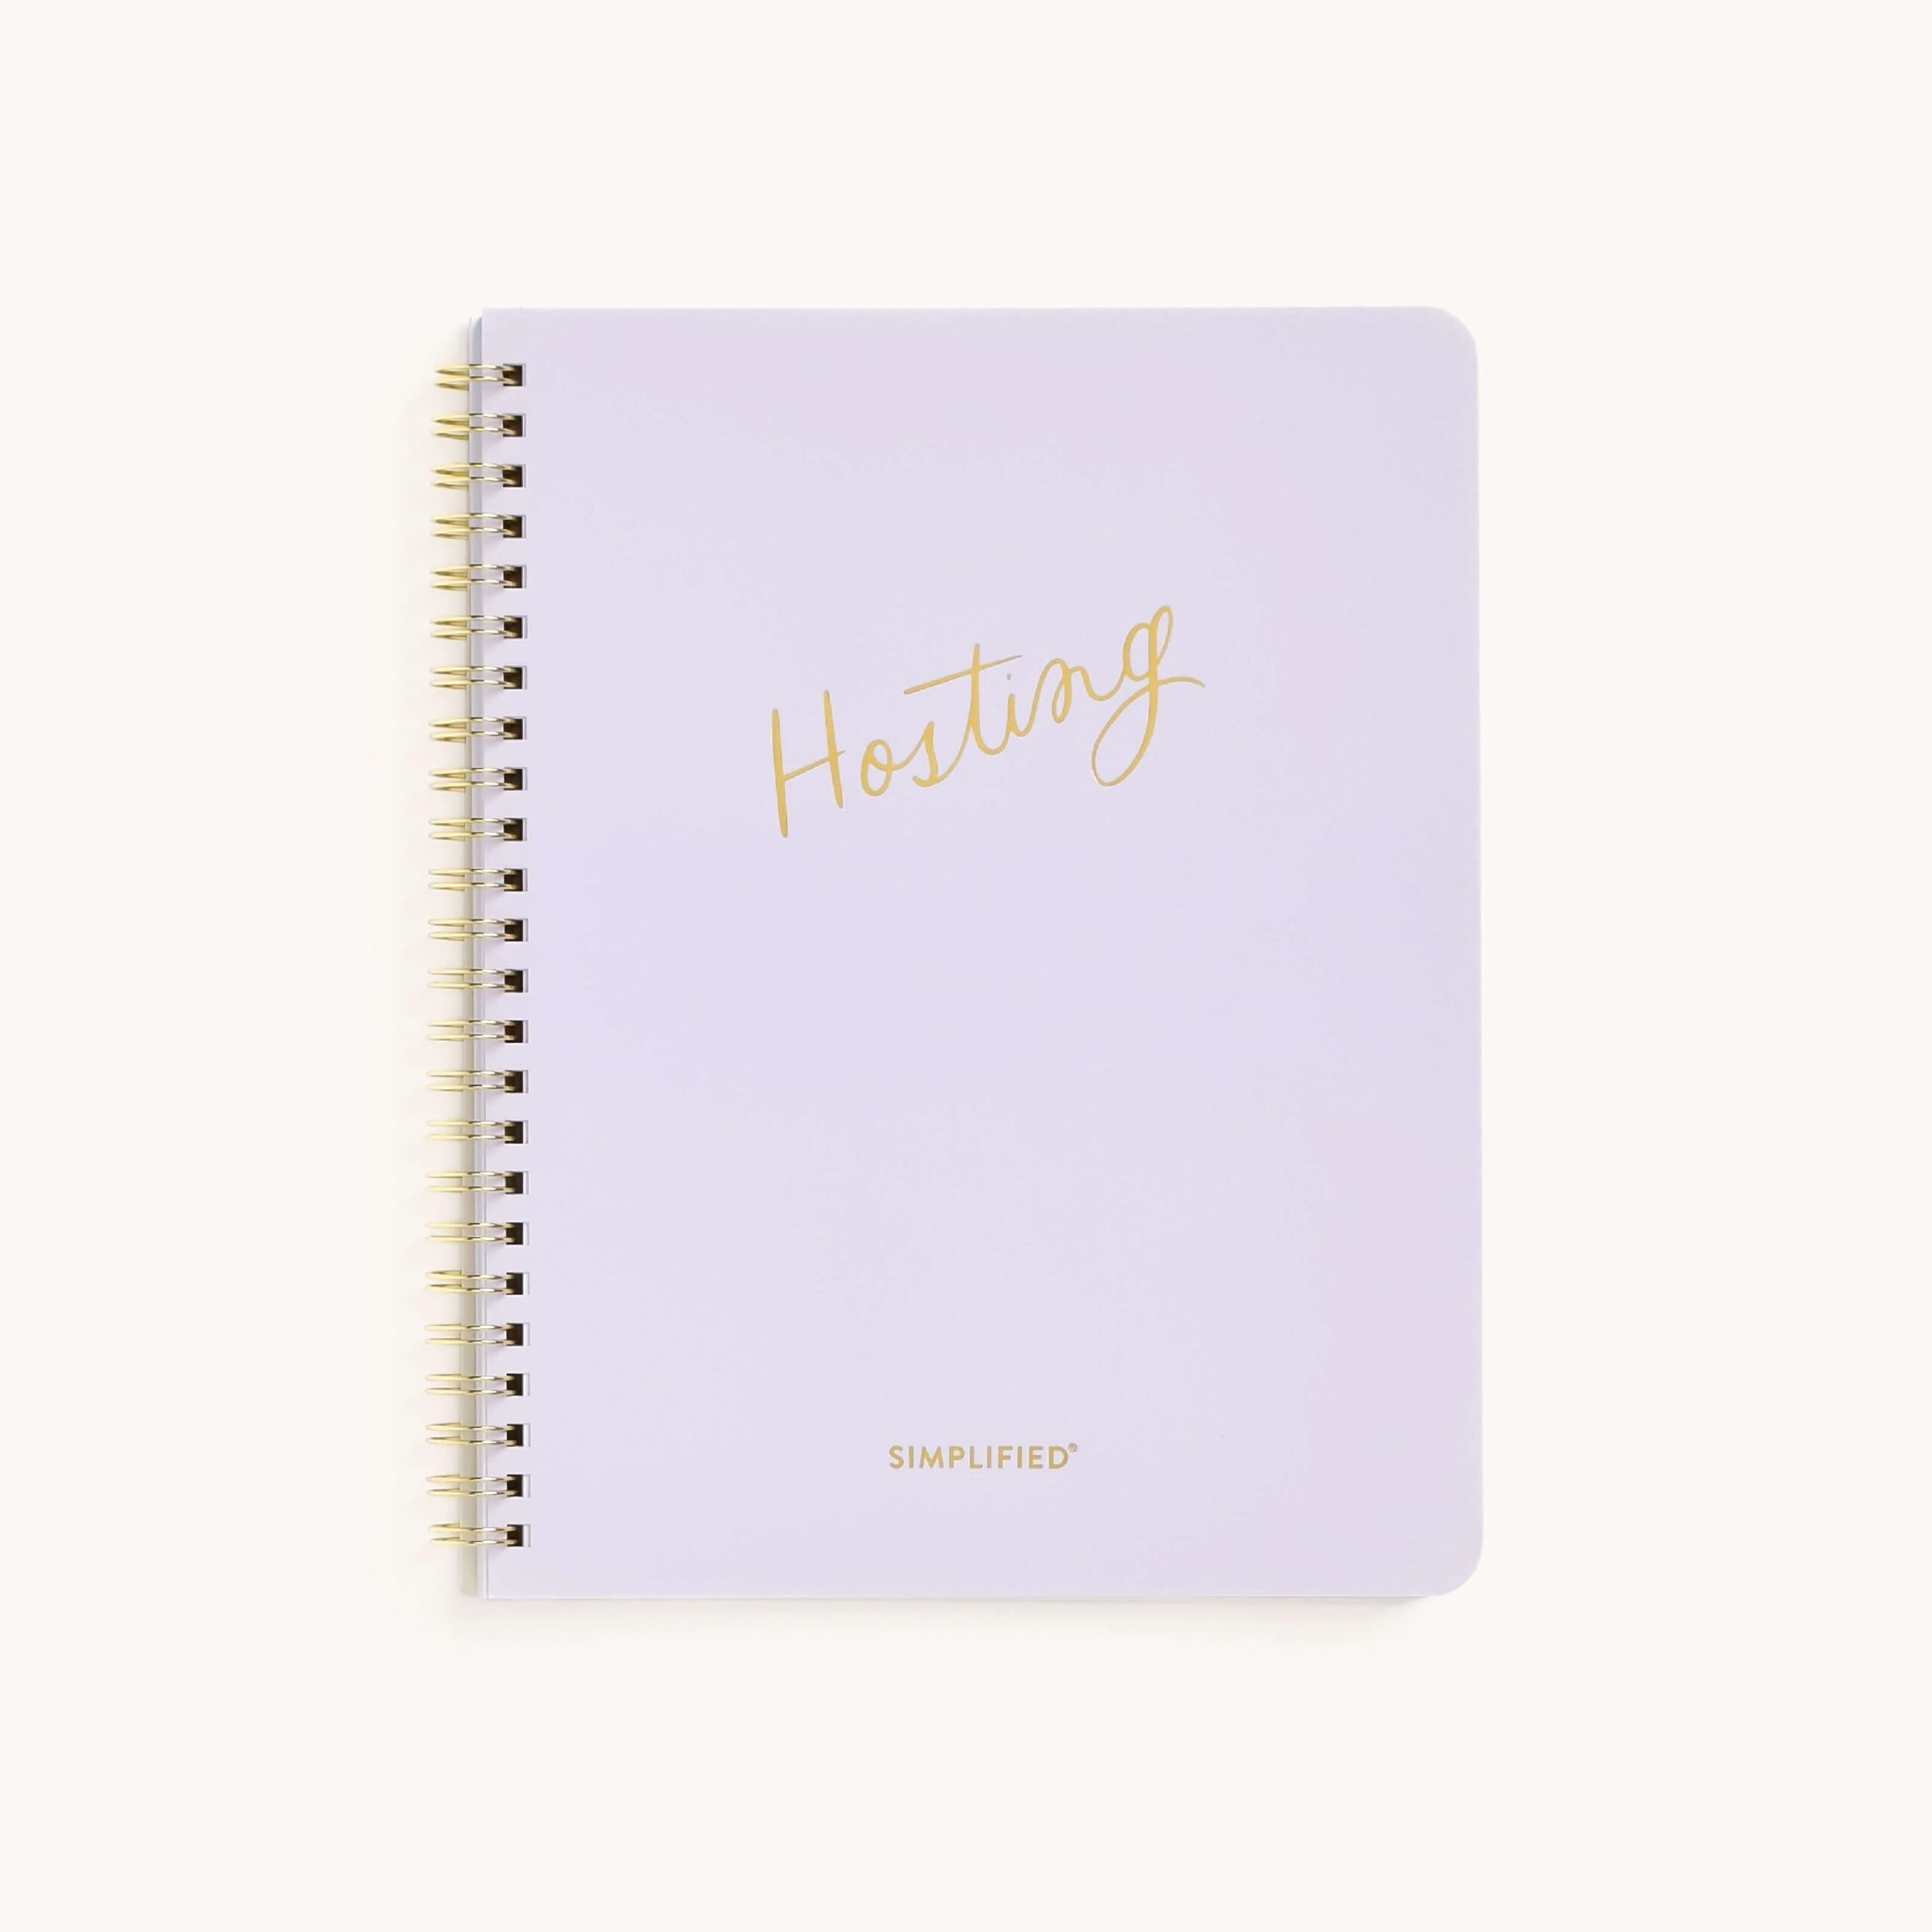 Hosted notebooks